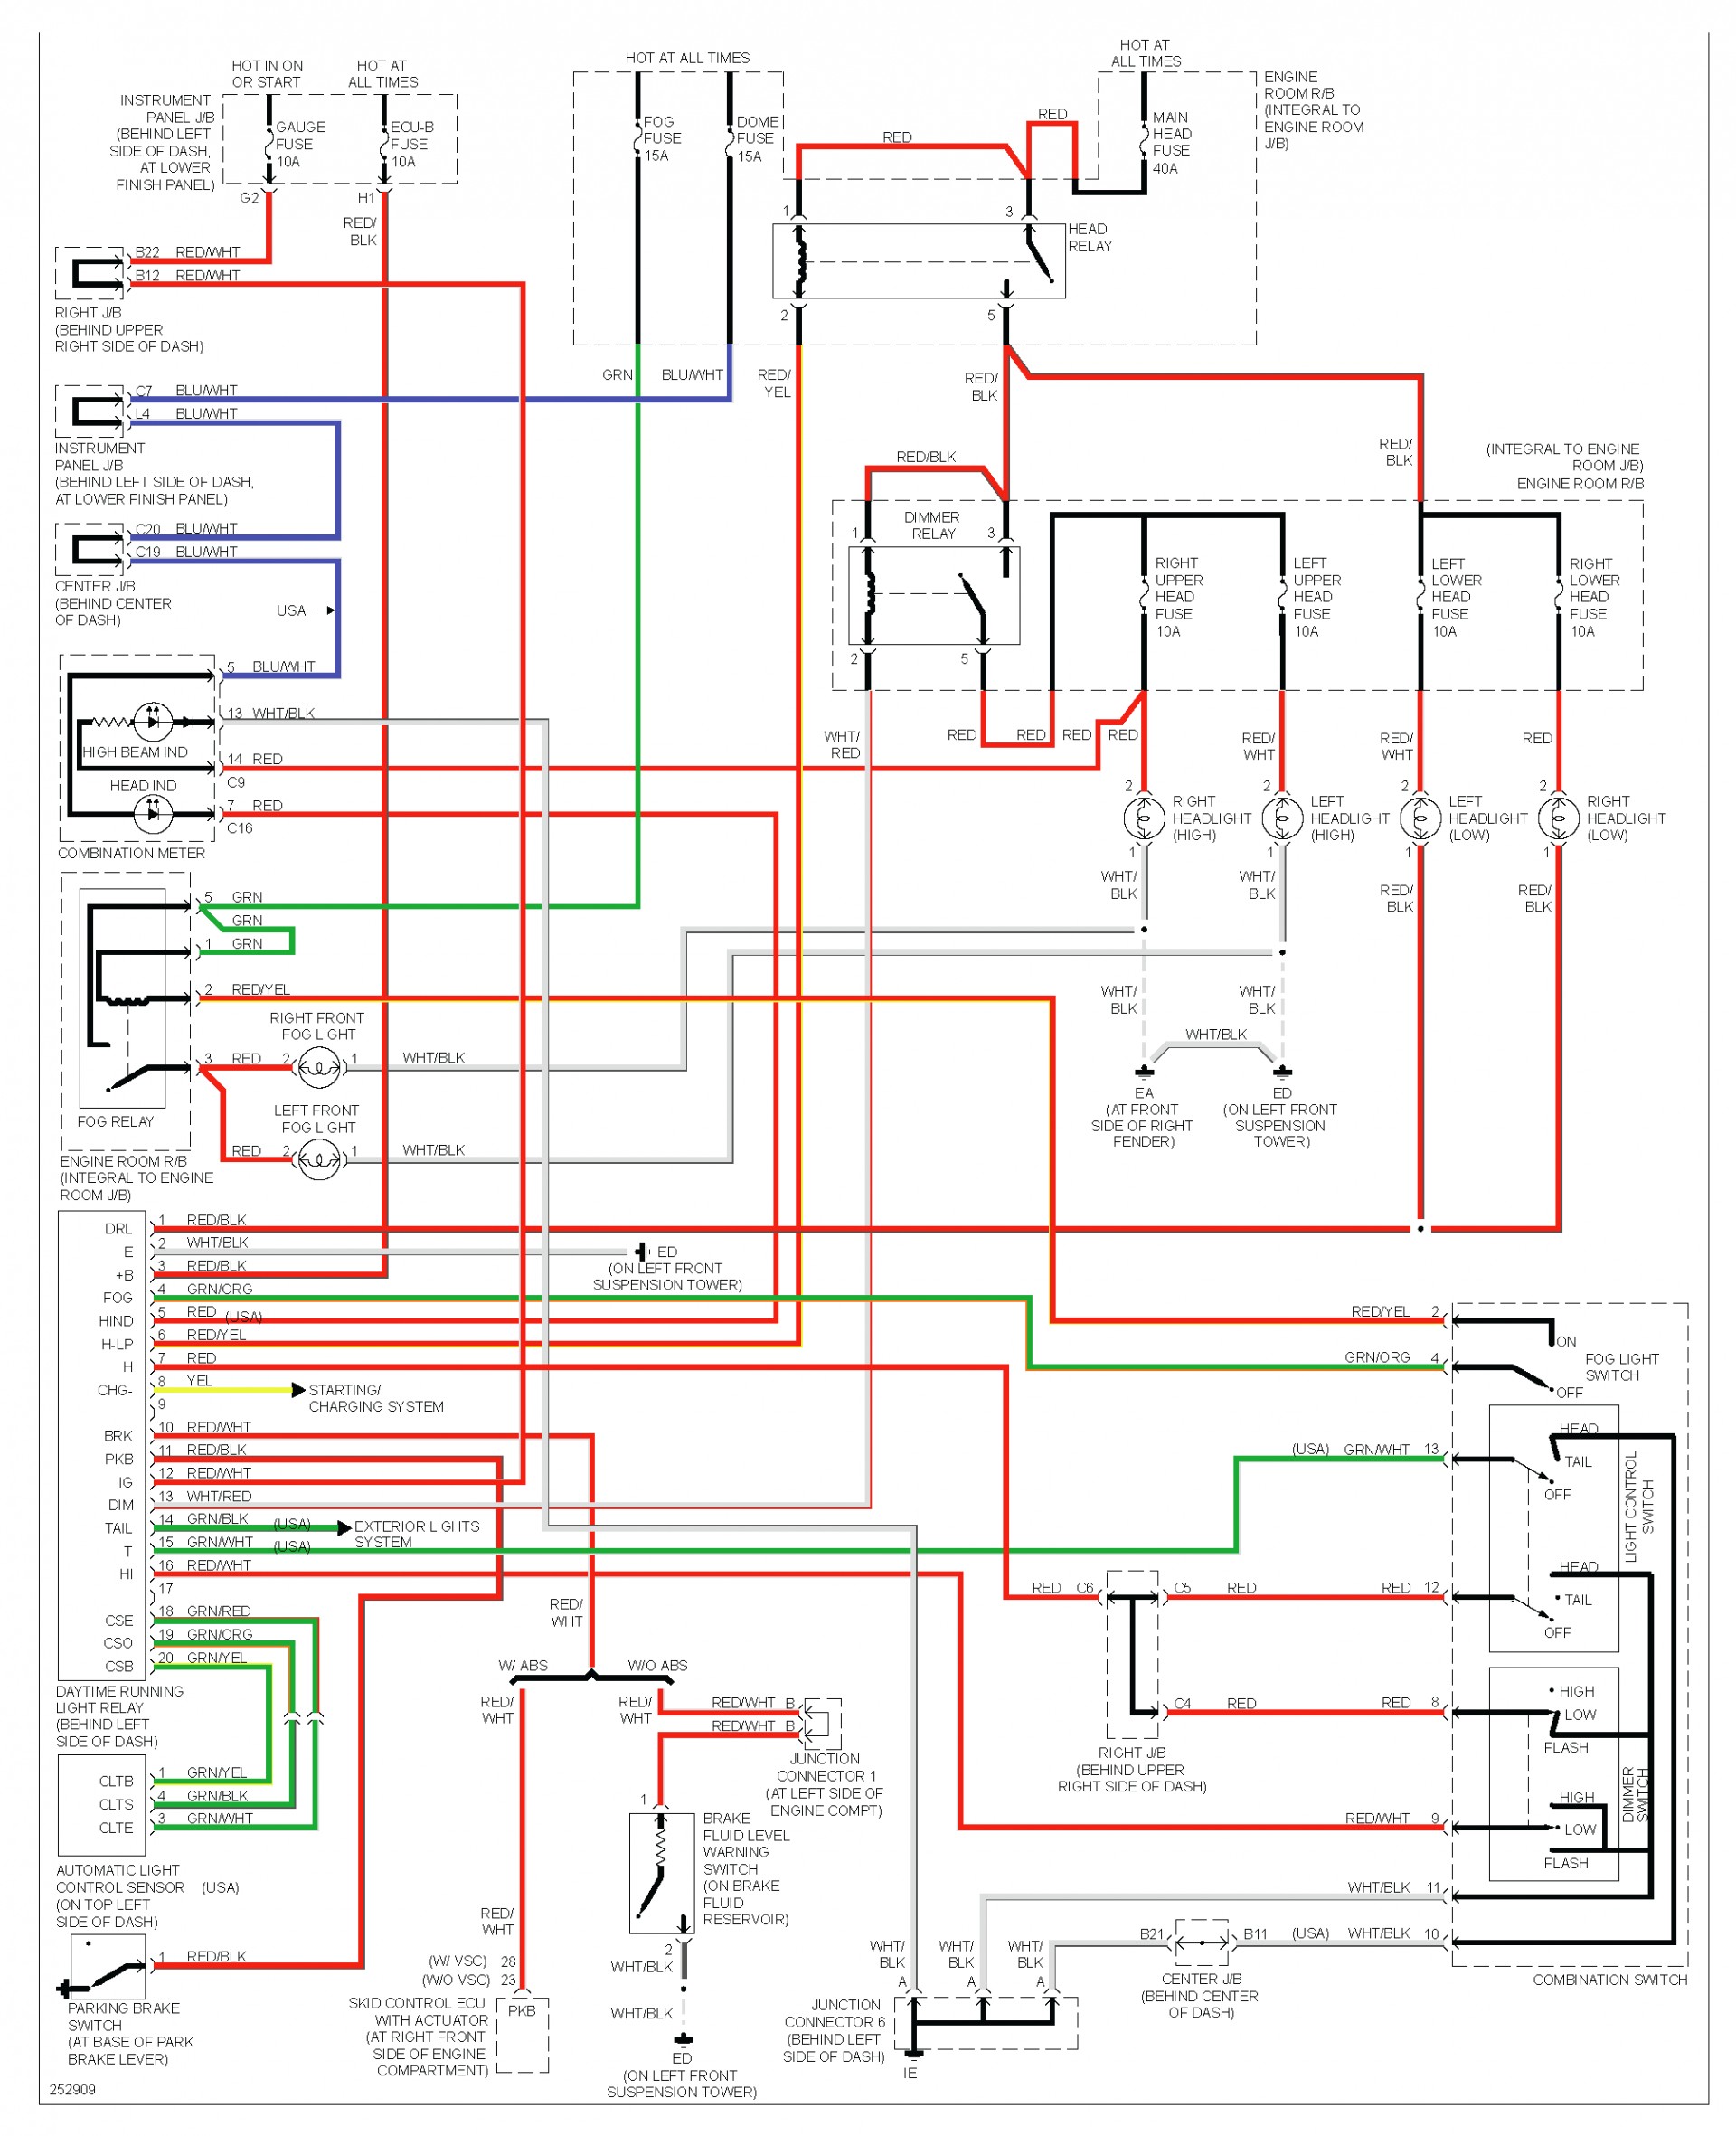 Engine Test Stand Wiring Diagram Electric Actuator Wiring Di… Wiring Diagrams Of Engine Test Stand Wiring Diagram